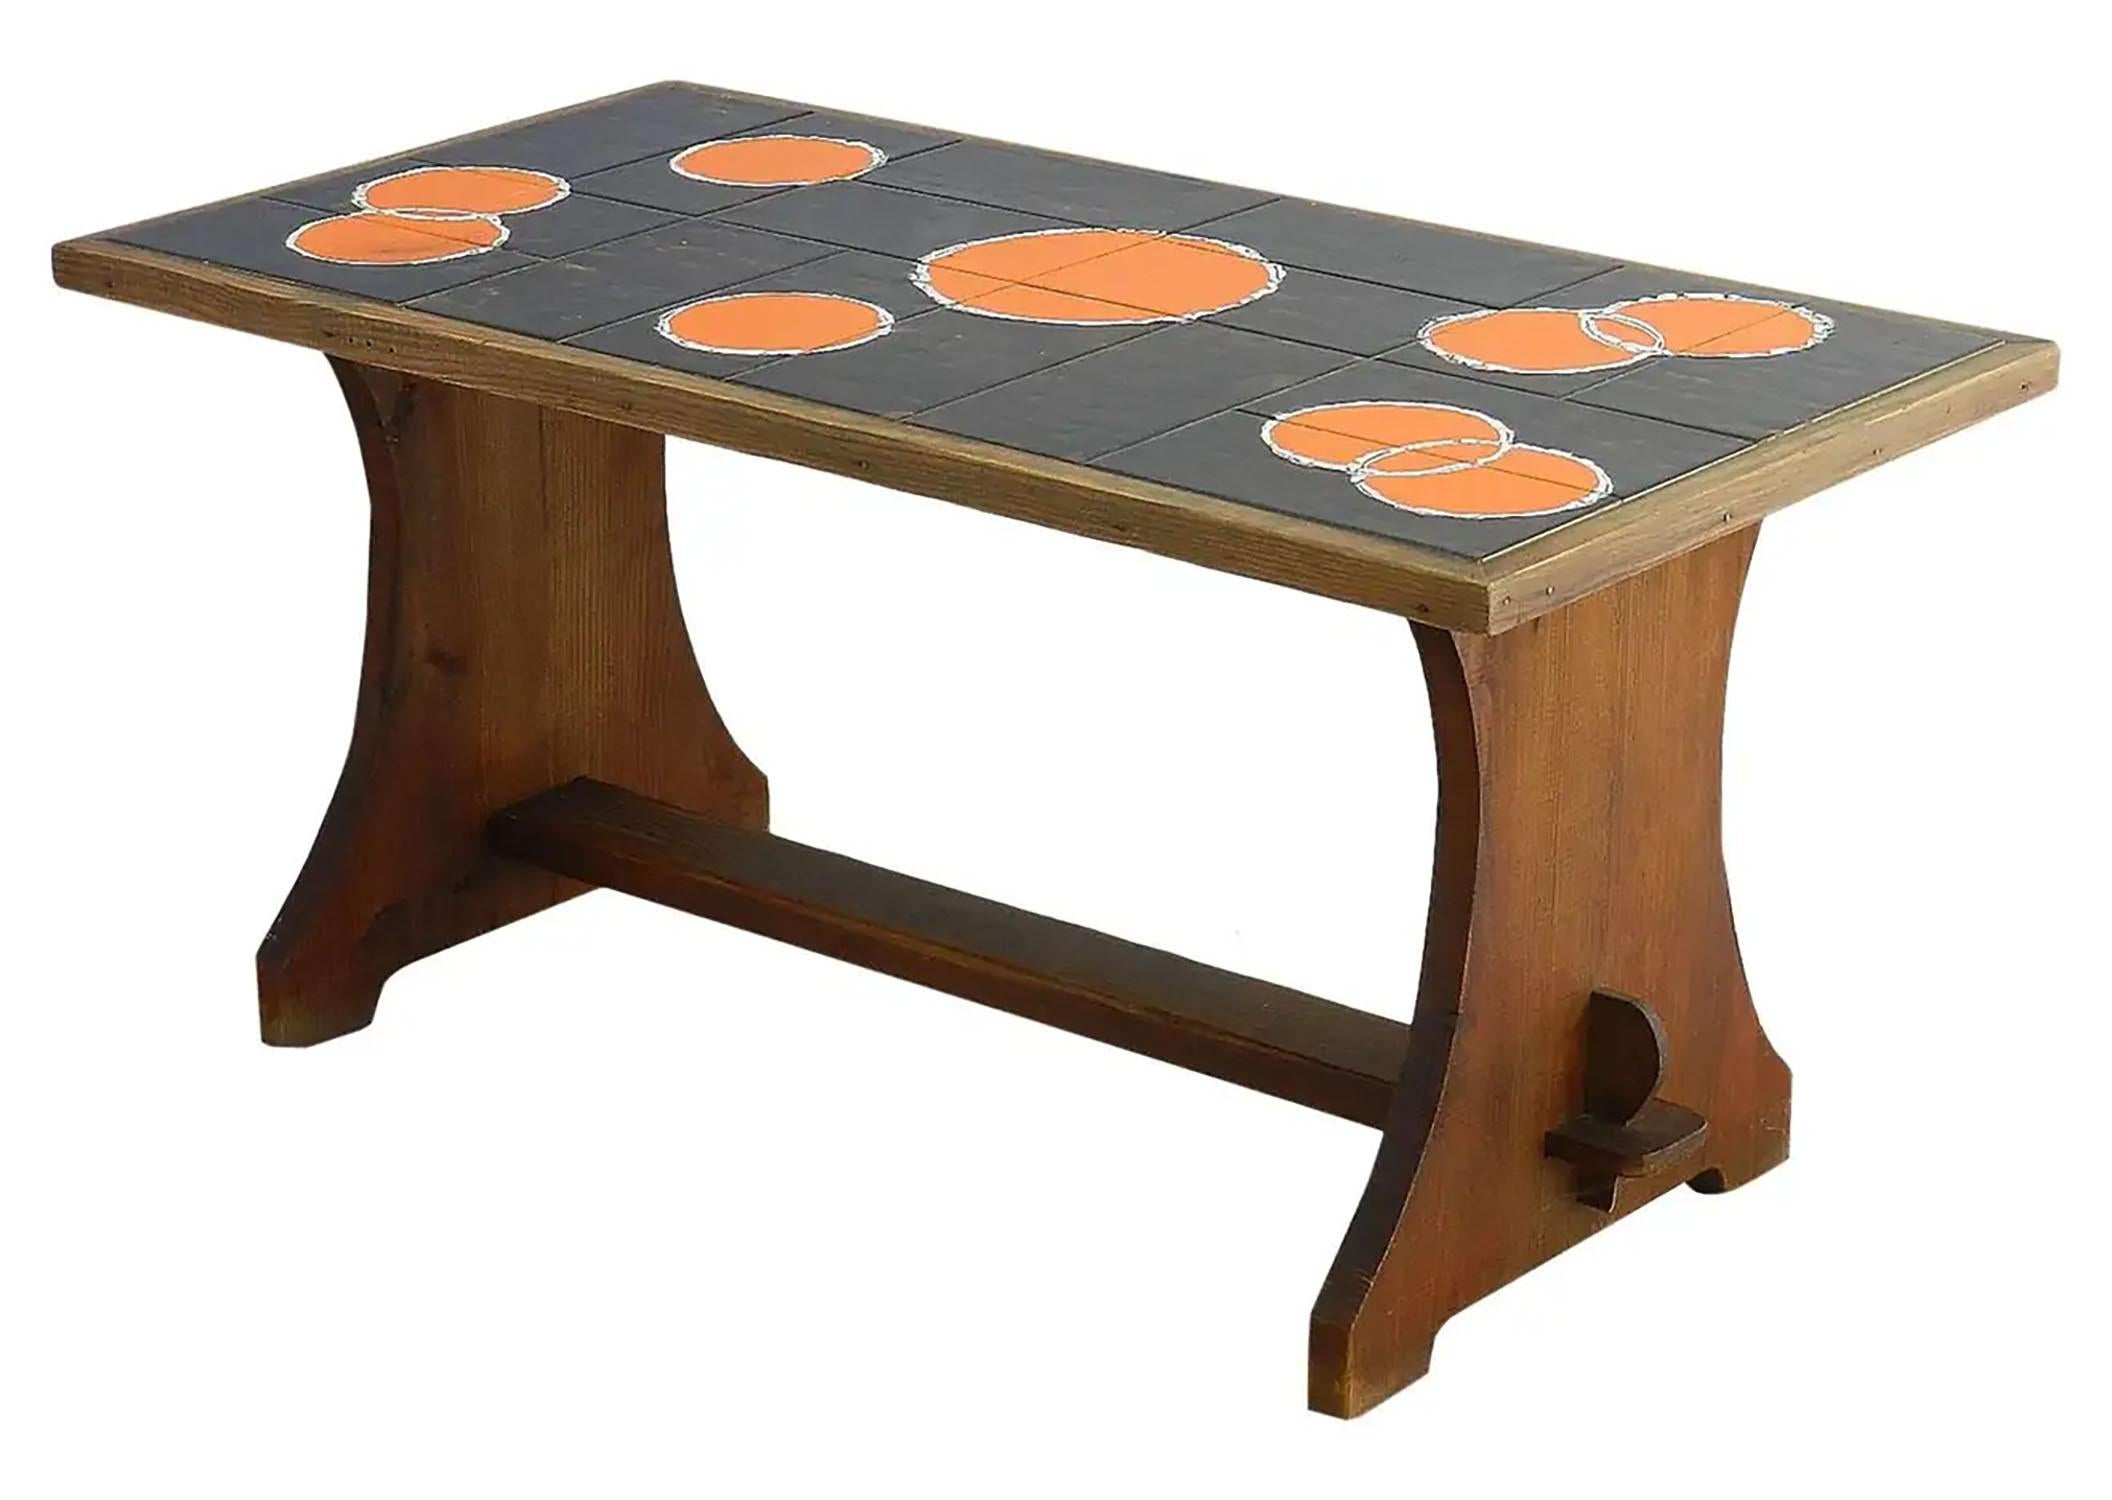 French Midcentury Coffee Table Refectory Pine with Tiled Top, circa 1960s 